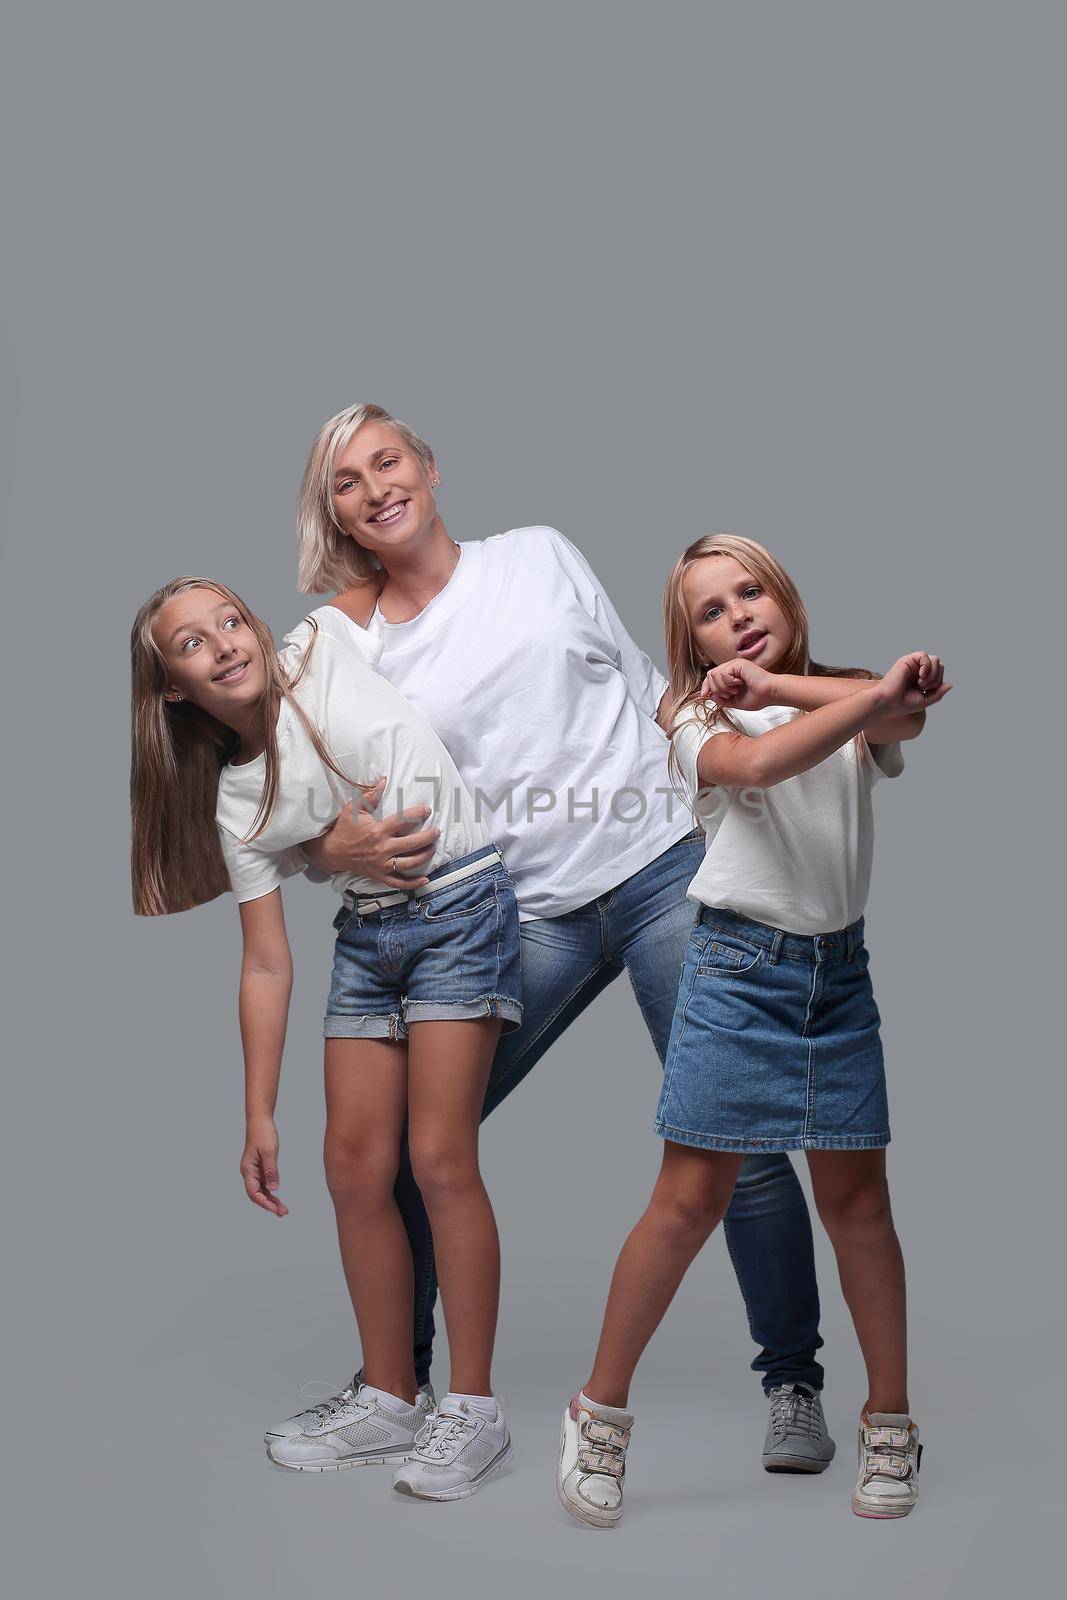 in full growth. mother and children dance together . isolated on white background